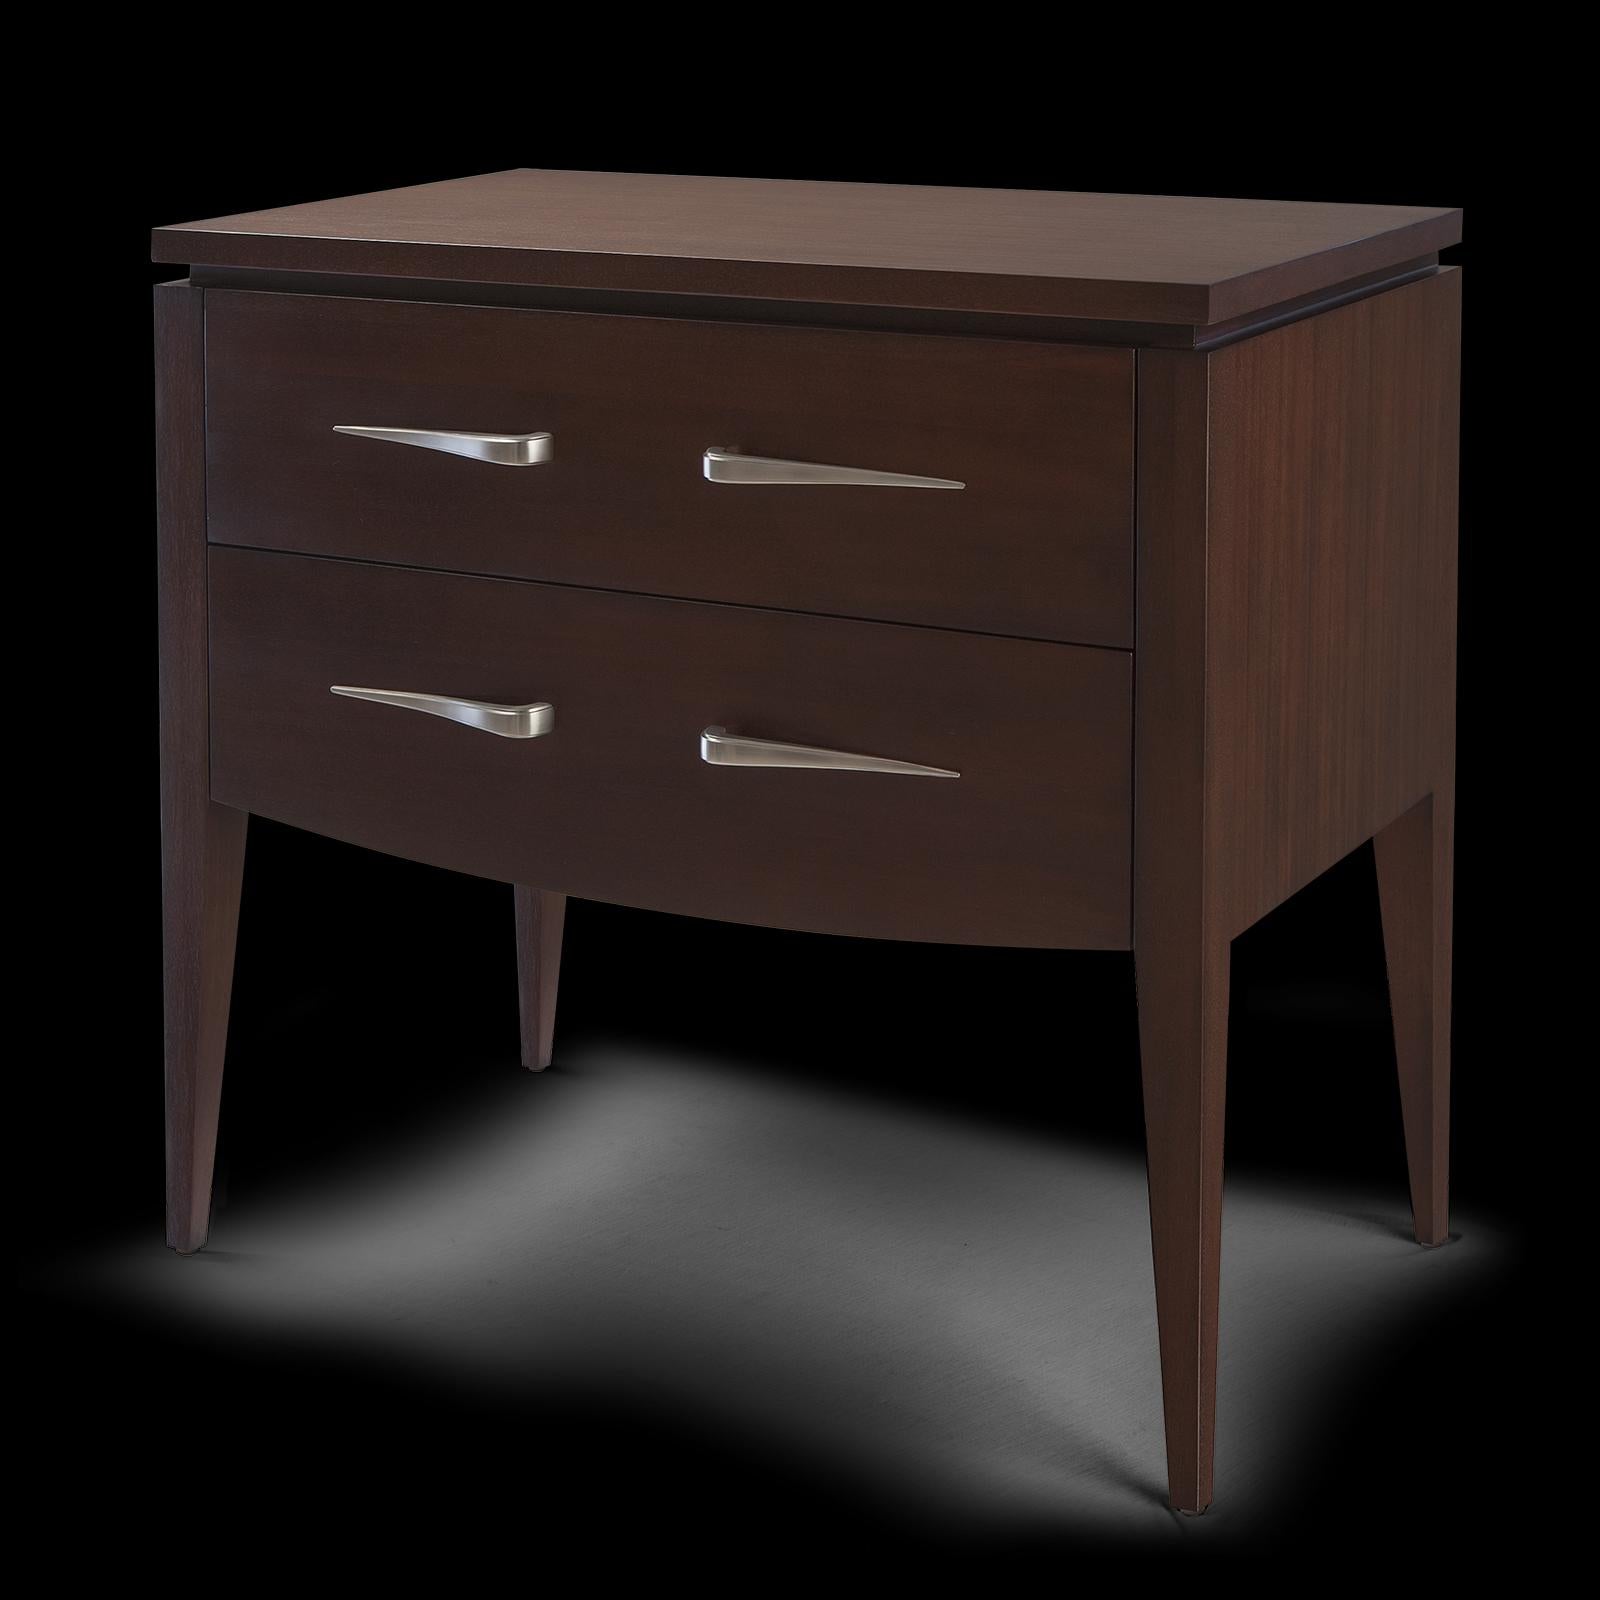 Side table or nightstand Cheraton in solid mahogany
wood and engineered wood construction. With veneered
mahogany top and with 2 drawers with easy glide.